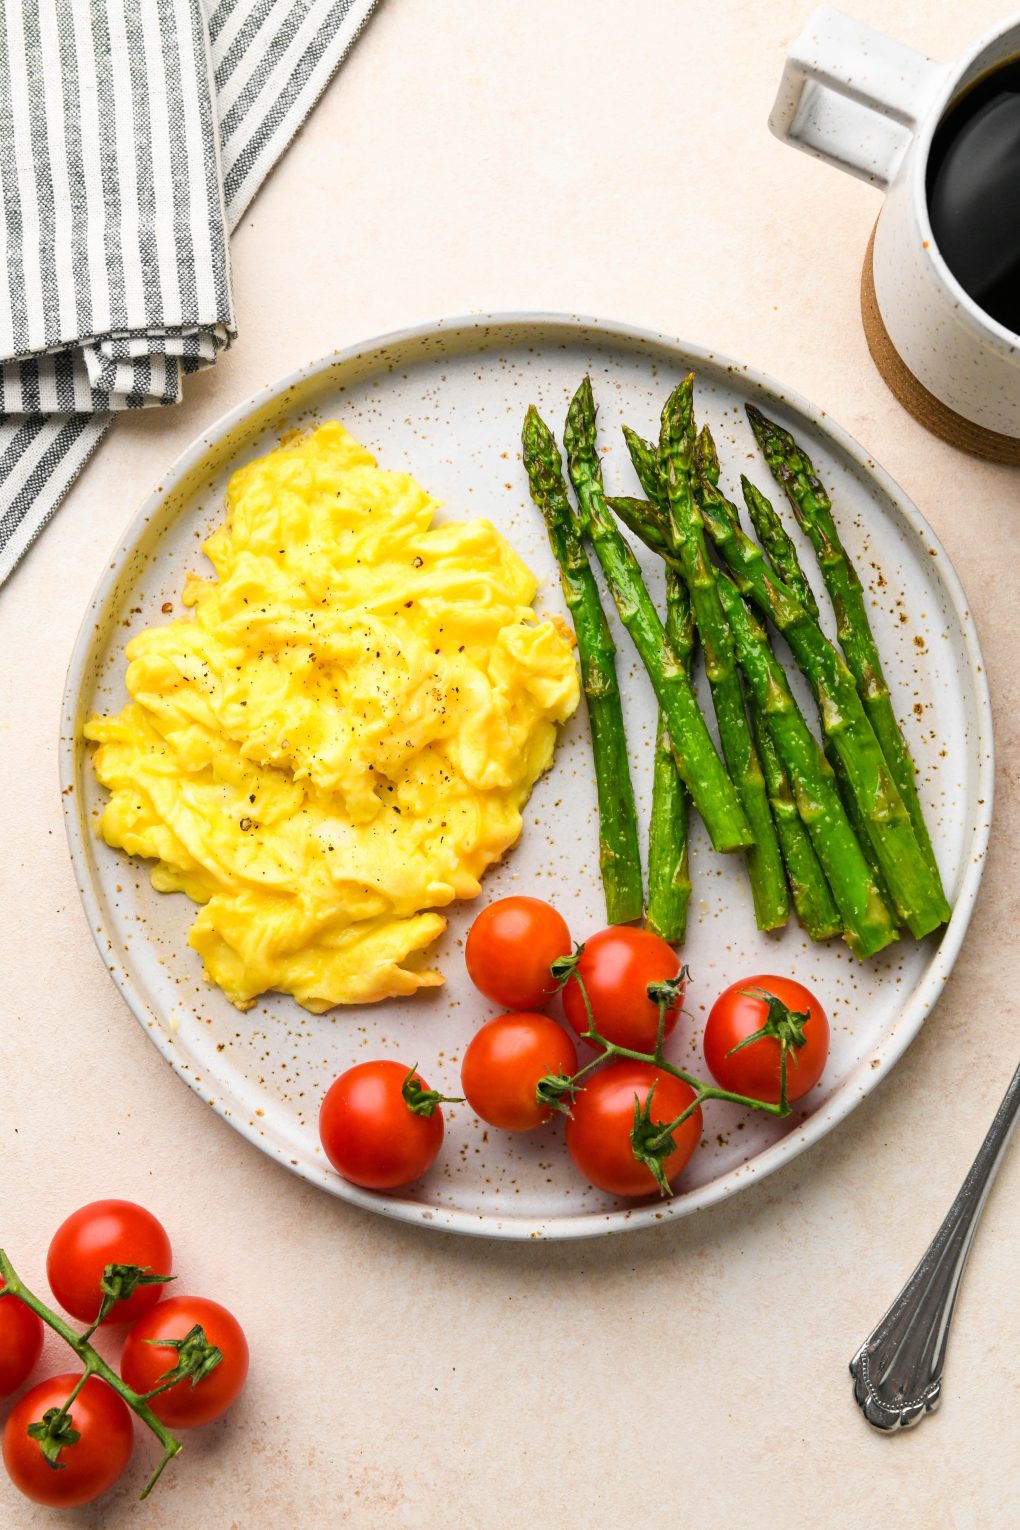 Whole30 breakfast on a speckled plate: Soft scrambled eggs with a side of roasted asparagus and cherry tomatoes.